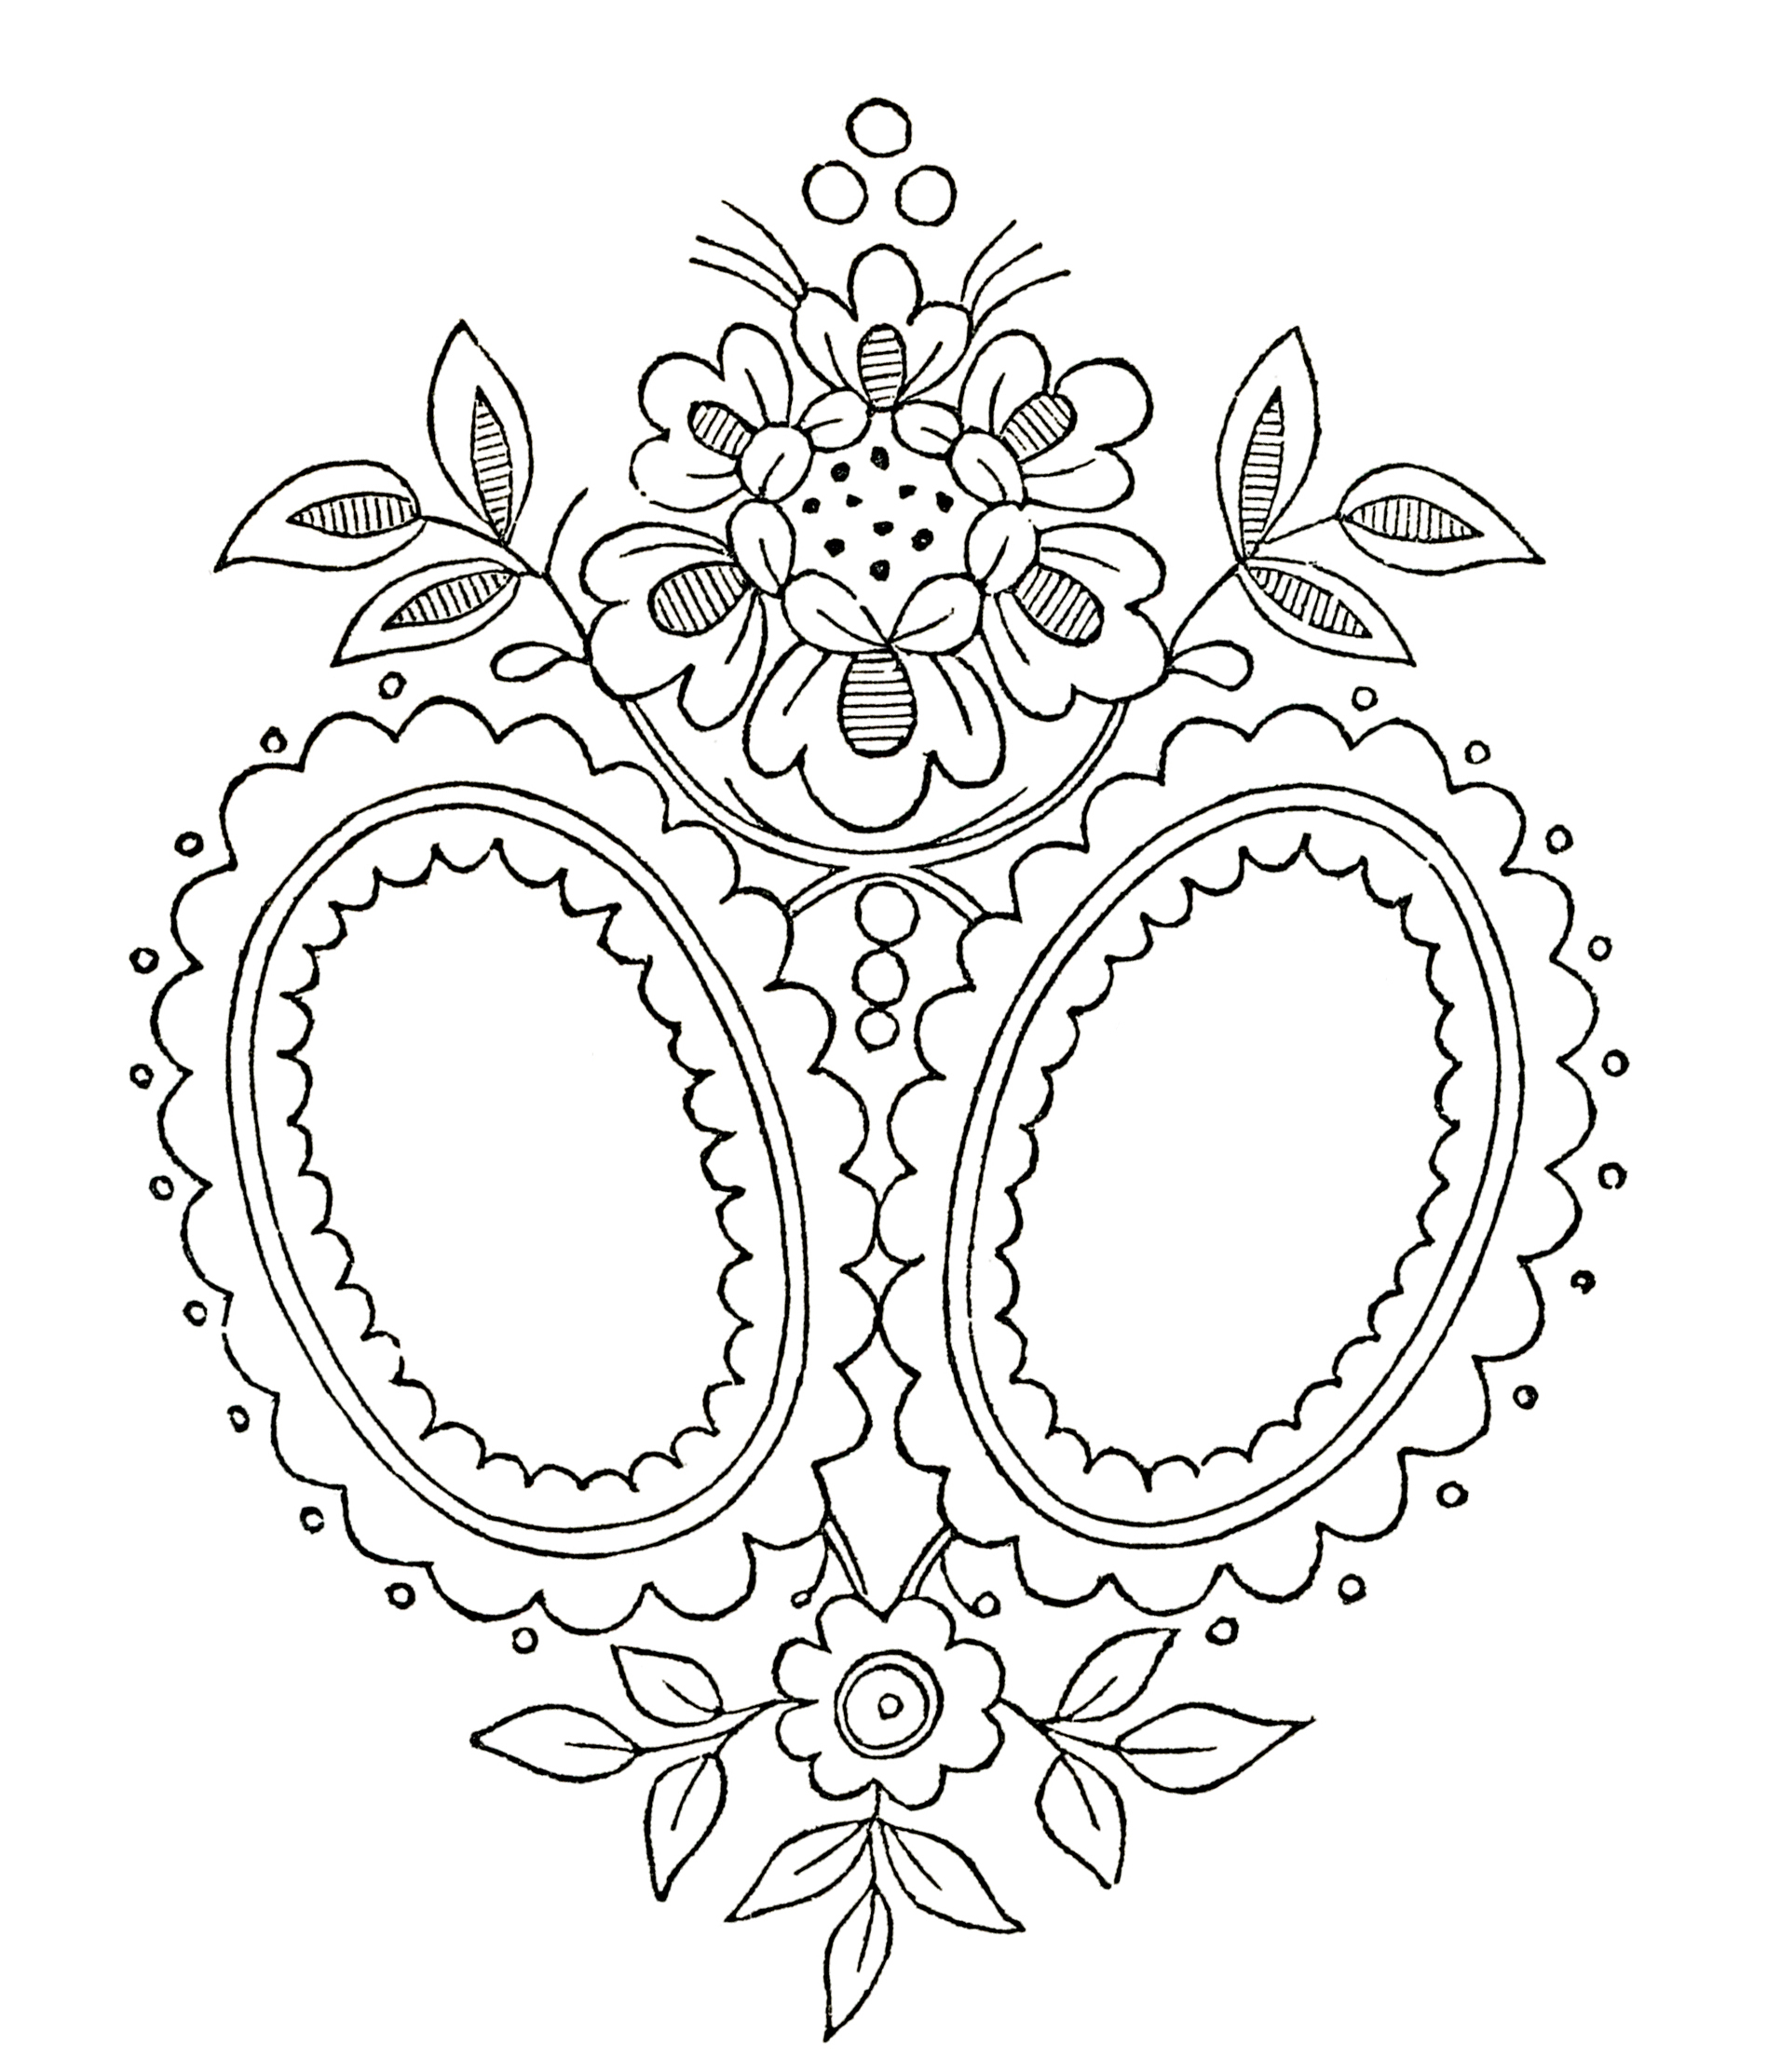 Antique Embroidery Patterns Vintage Monogram Embroidery Pattern The Graphics Fairy